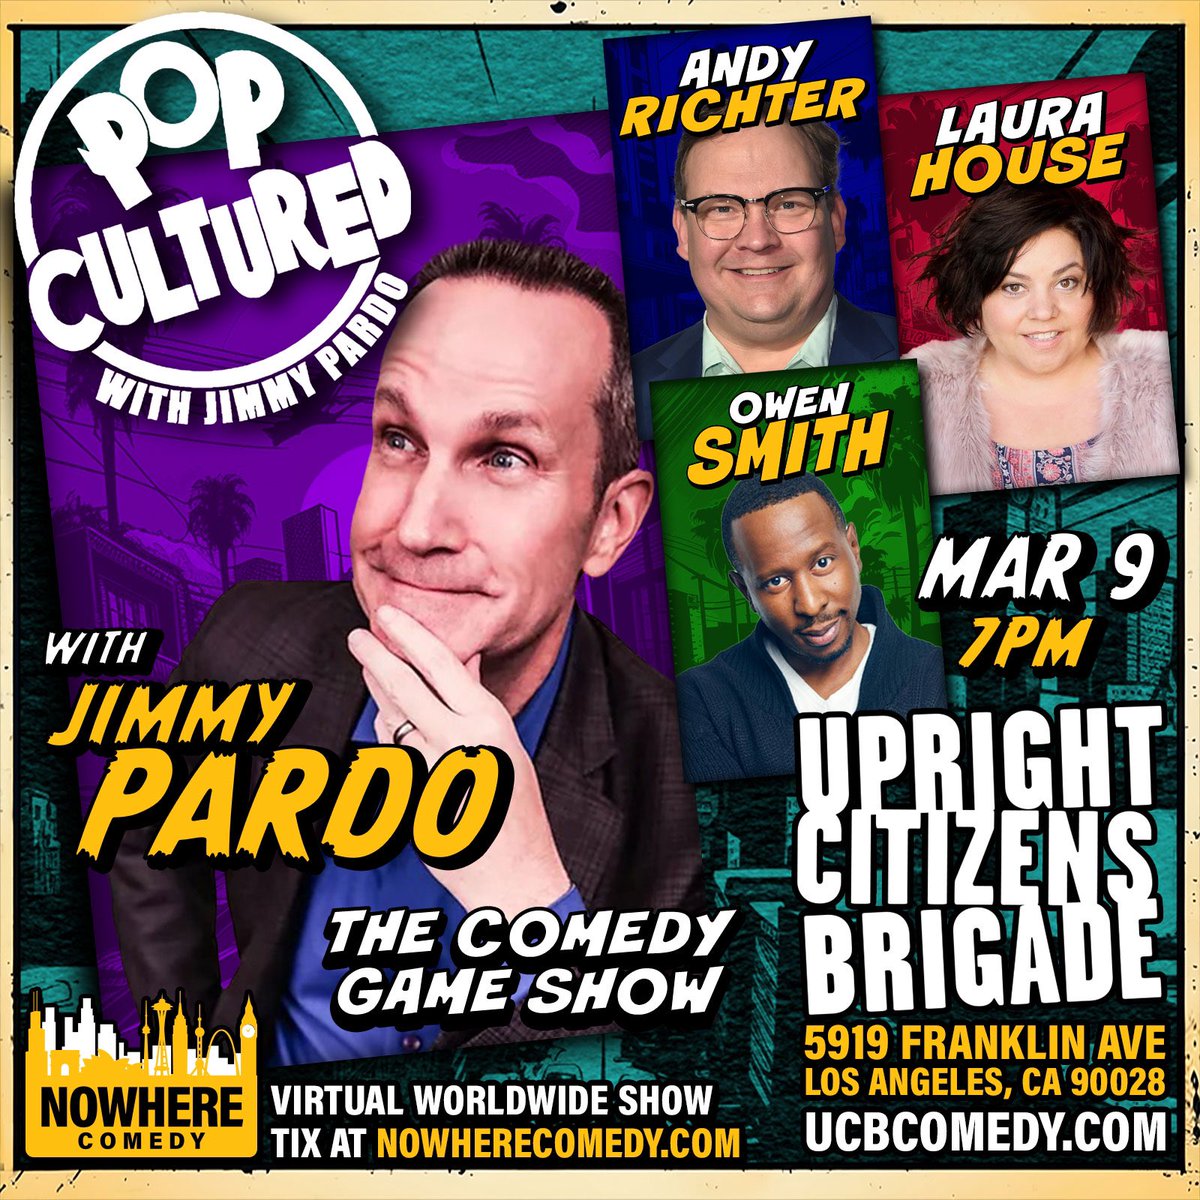 TONIGHT AT 7pm! Come see host @jimmypardo and a killer lineup of comedians @ucbtla! @AndyRichter @imlaurahouse @OwenSmith4Real and Mitch Silpa! In-person tix available at: ucbcomedy.com/show/pop-cultu…. Streaming tix avail @NowhereComedy!